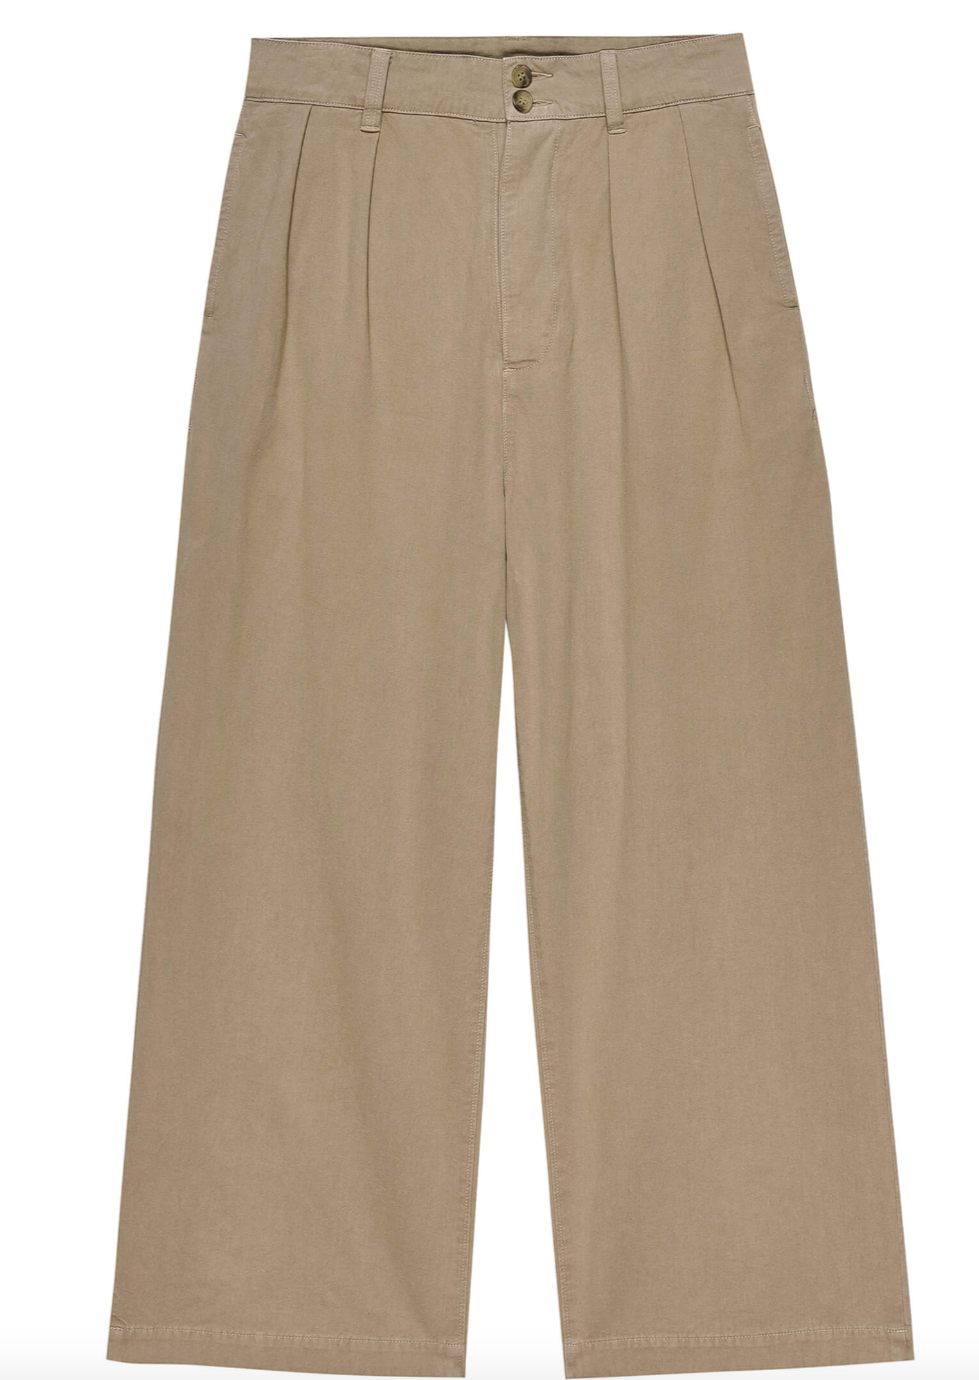 The Town Pant Pants The Great.   